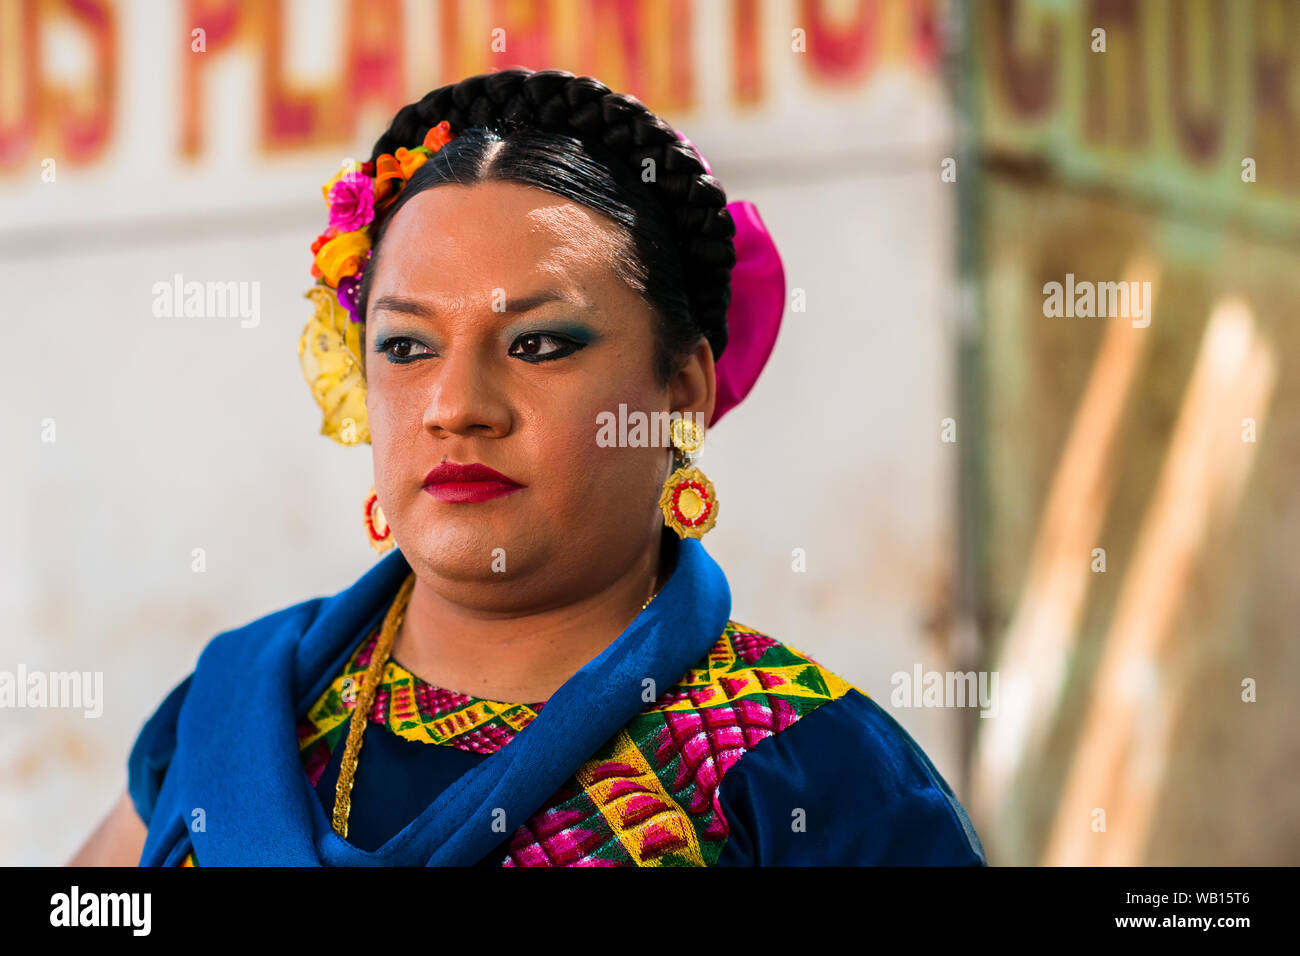 A Mexican “muxe” (typically, a homosexual man wearing female clothes) takes part in the festival in Juchitán de Zaragoza, Mexico. Stock Photo